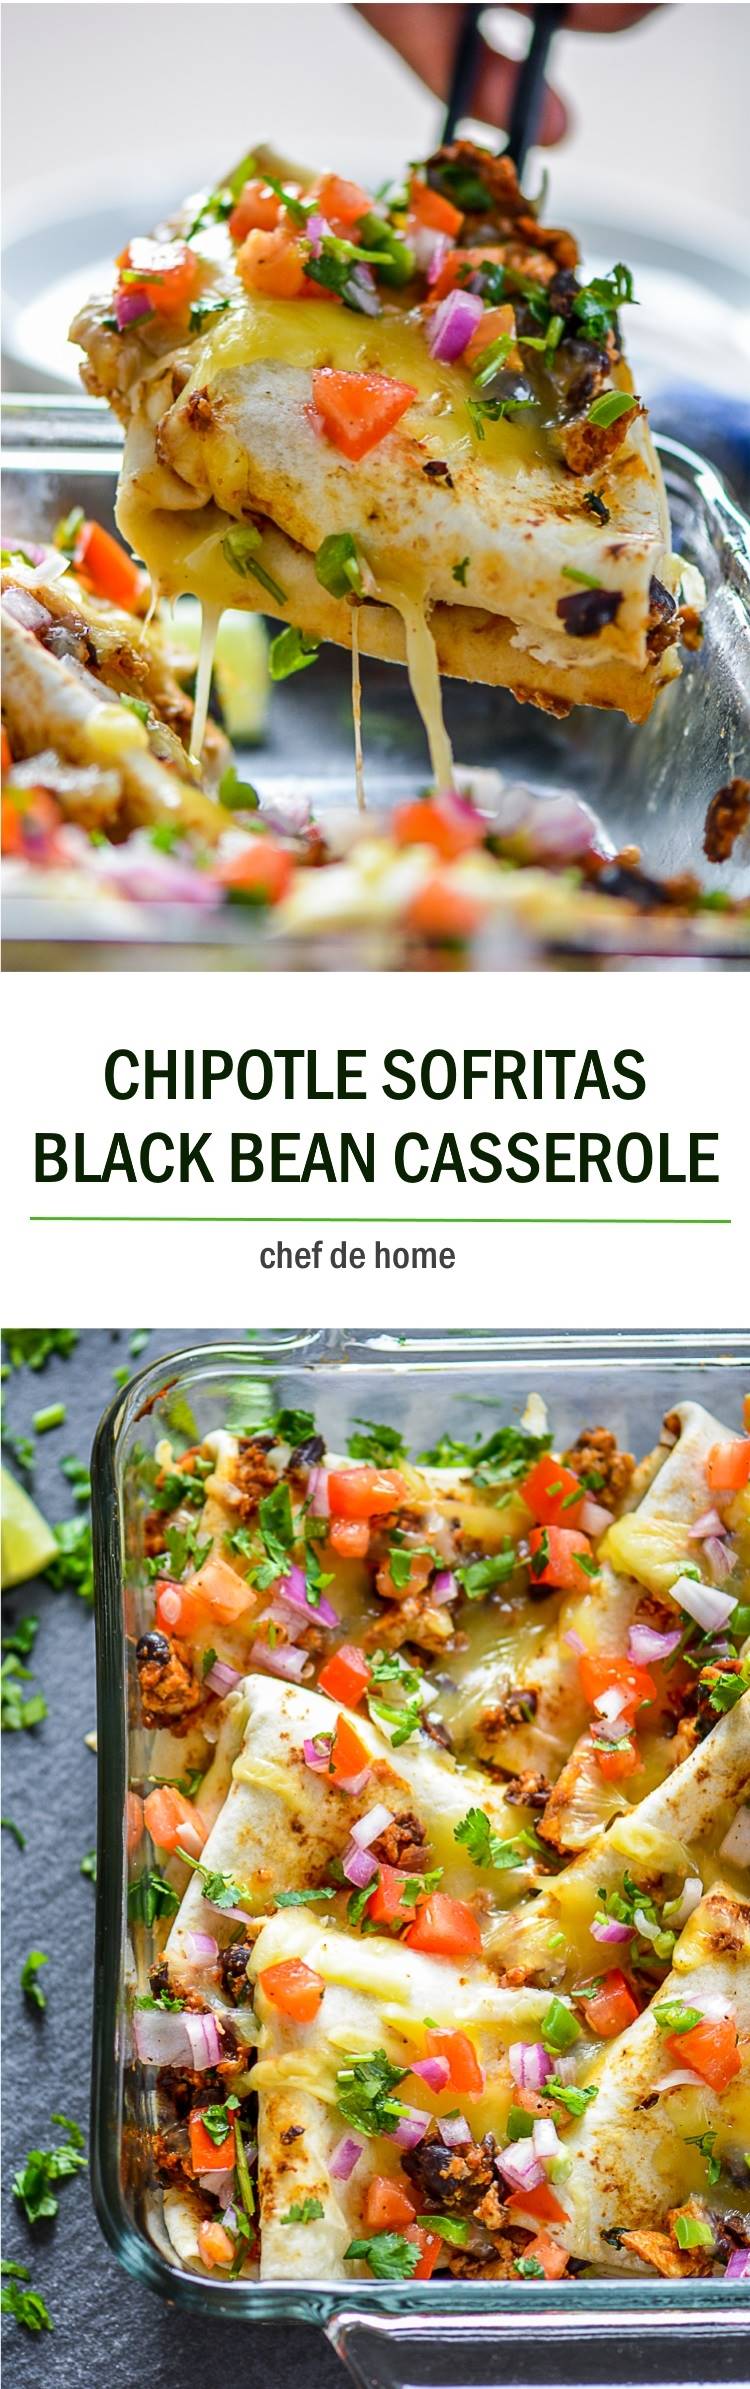 Chipotle Sofritas and Black Beans Breakfast Casserole | chefdehome.com